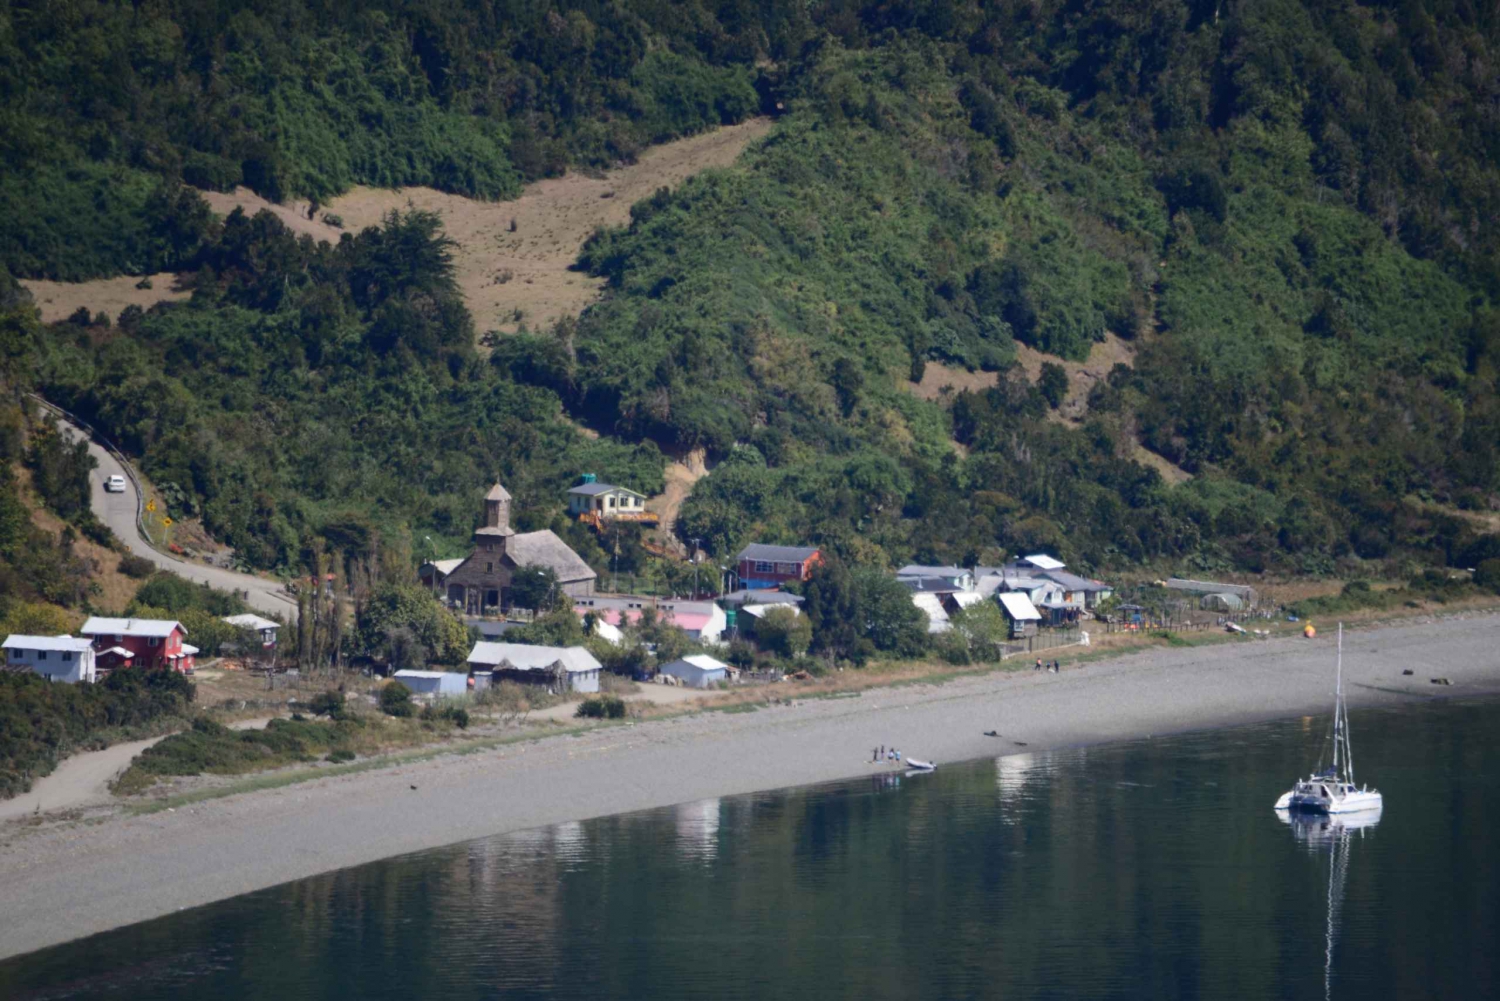 Lemuy Island: Churches and trees in Chiloé.